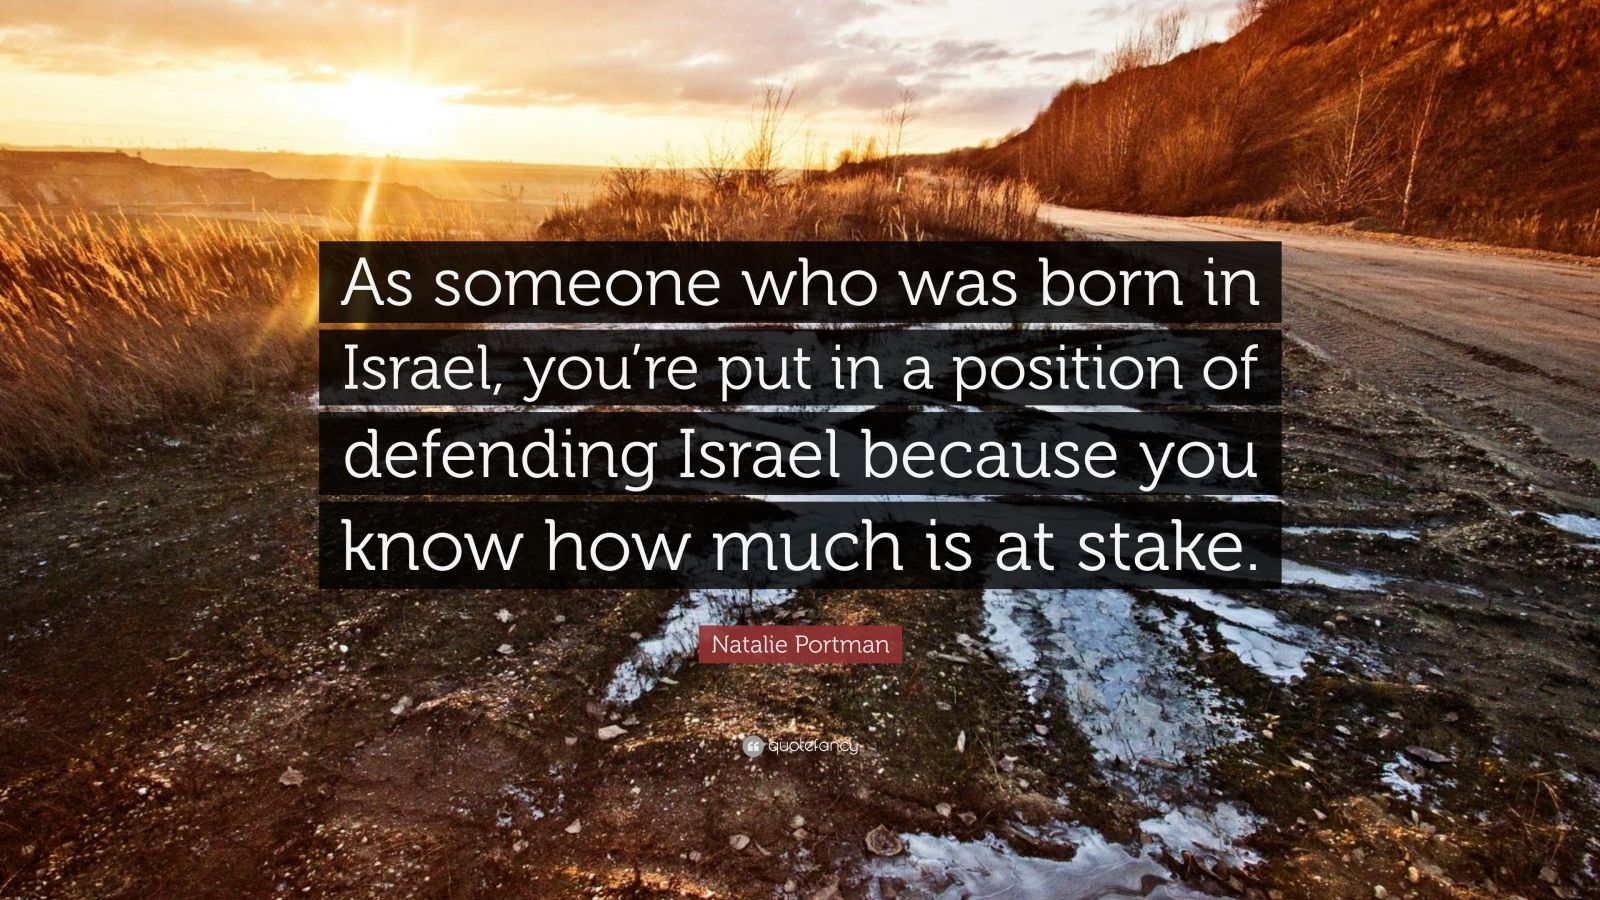 Natalie Portman Quote “As someone who was born in Israel you re